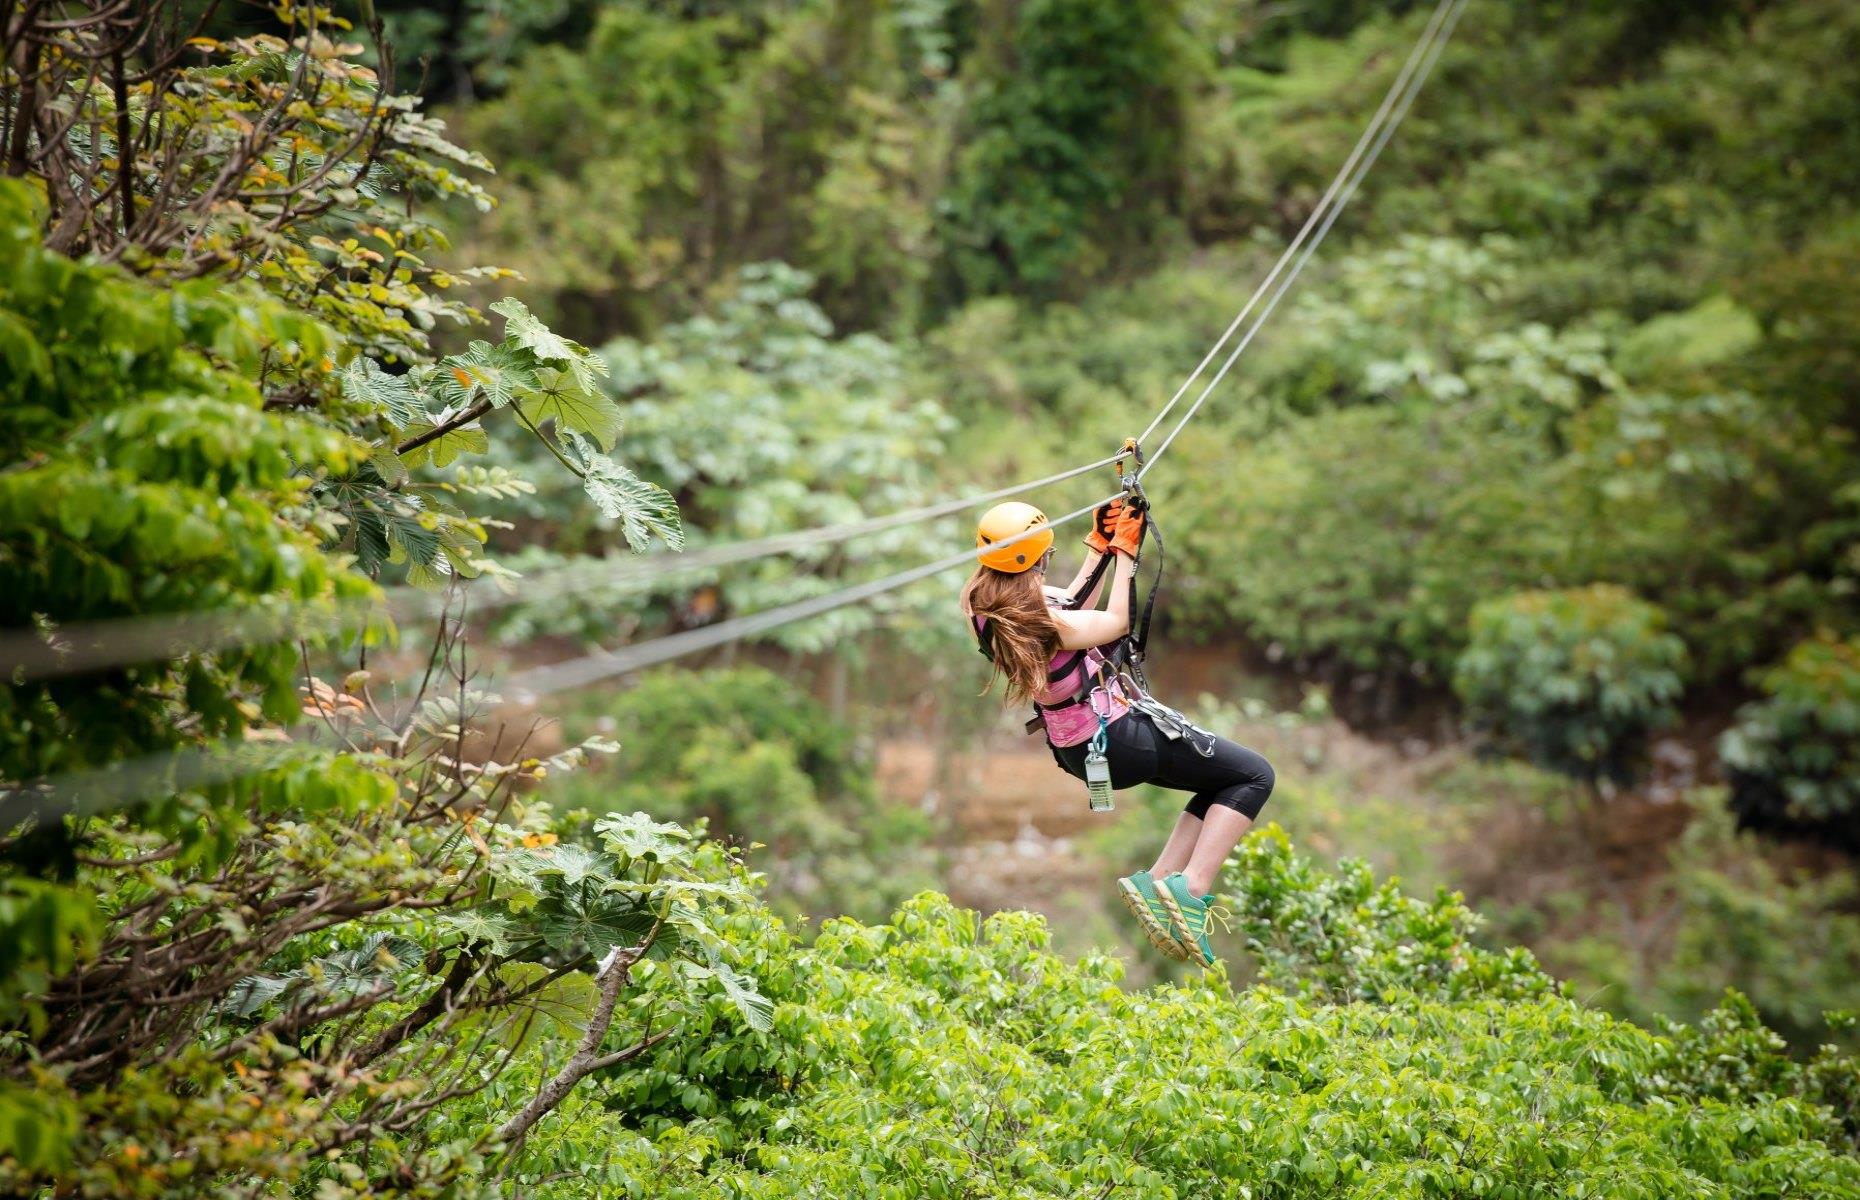 <p>With the longest zipline in America, ToroVerde Adventure Park is not for the fainthearted. The Monster is over 1.5 miles long and hits speeds of up to 95mph, as you fly horizontally above the forested mountain peaks, 1,247 feet up. Meanwhile, The Beast has you soaring like a bird along one of the world<span>’</span>s longest single-run ziplines at 4,745 feet, while the Toro Bikes cycle along a cable high in the sky, against a breathtaking backdrop of coastal views.</p>